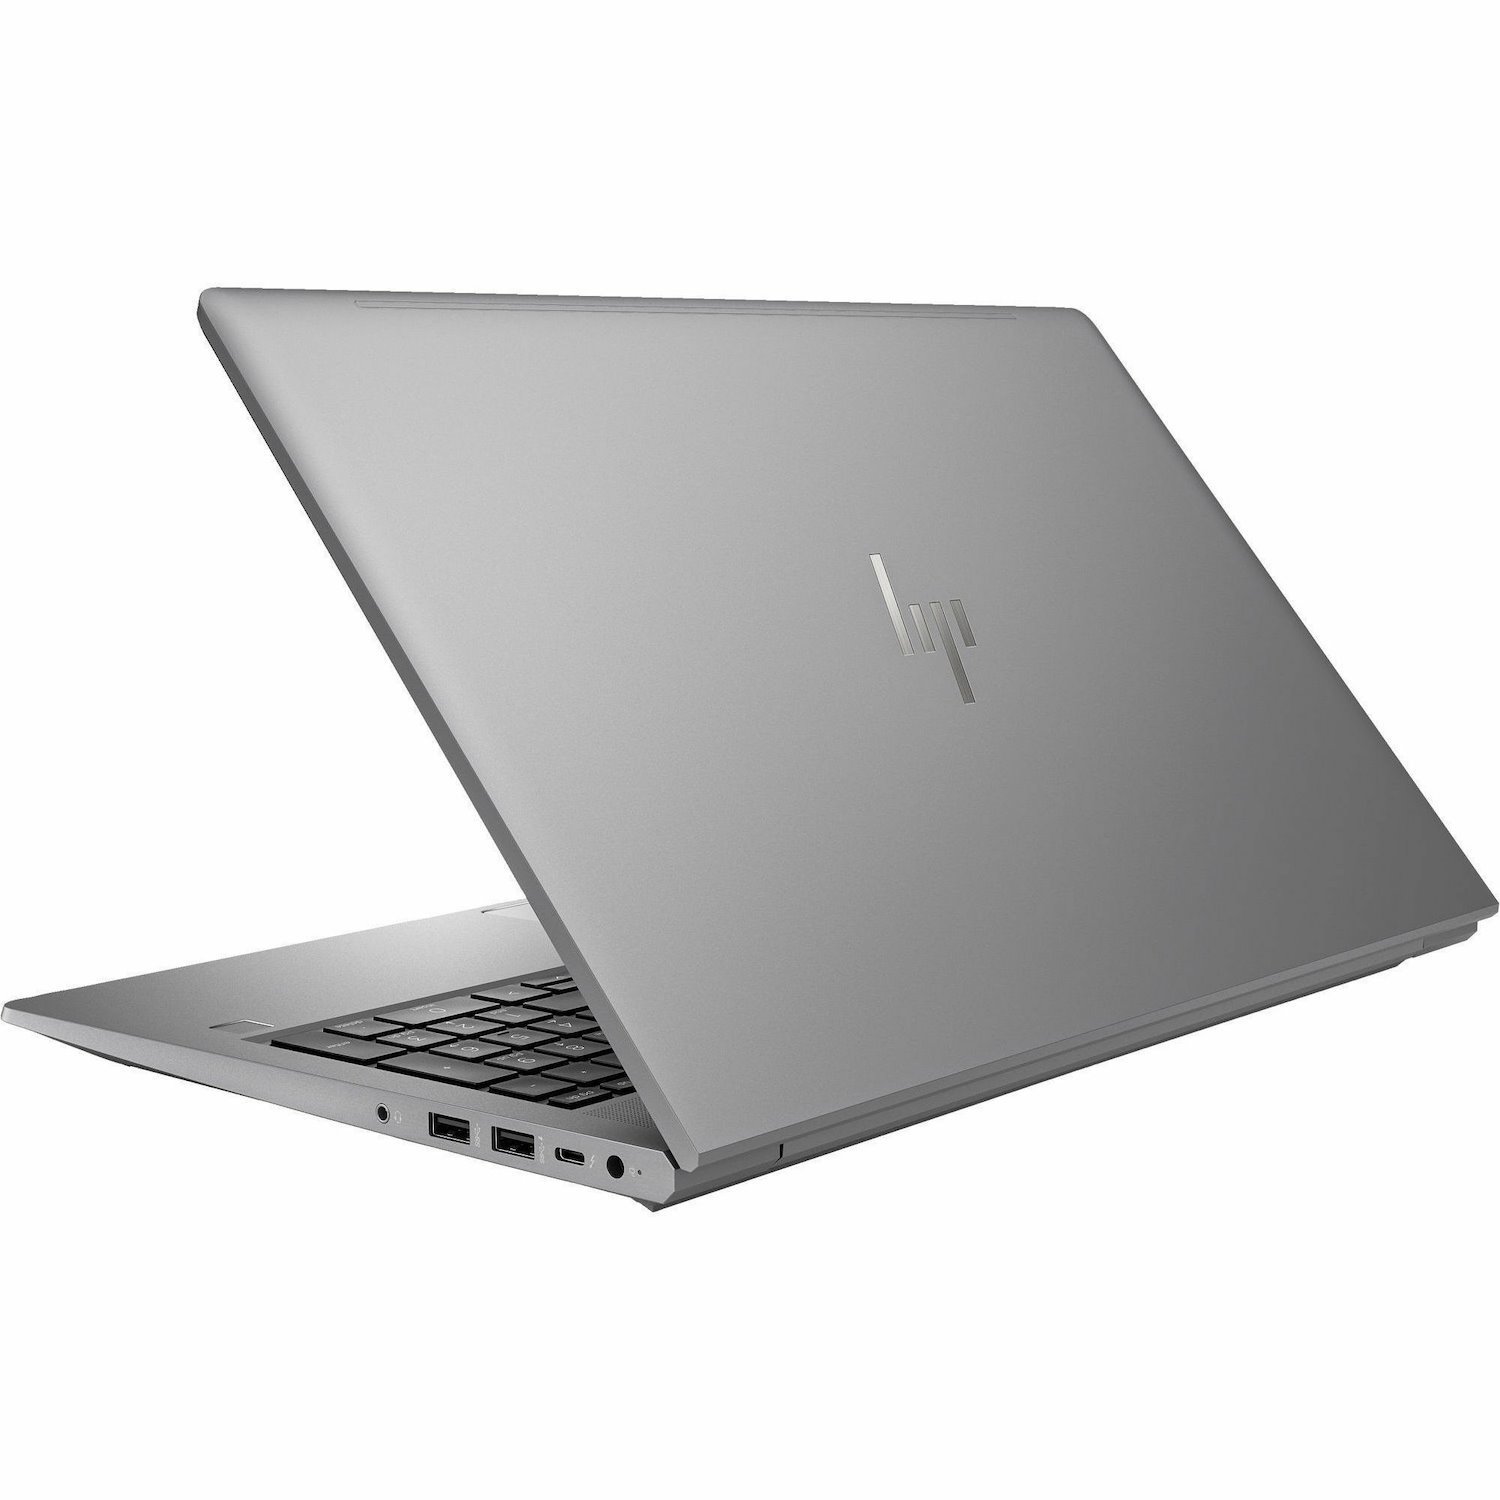 HP ZBook Power G10 15.6" Mobile Workstation - Full HD - Intel Core i7 13th Gen i7-13800H - 16 GB - 512 GB SSD